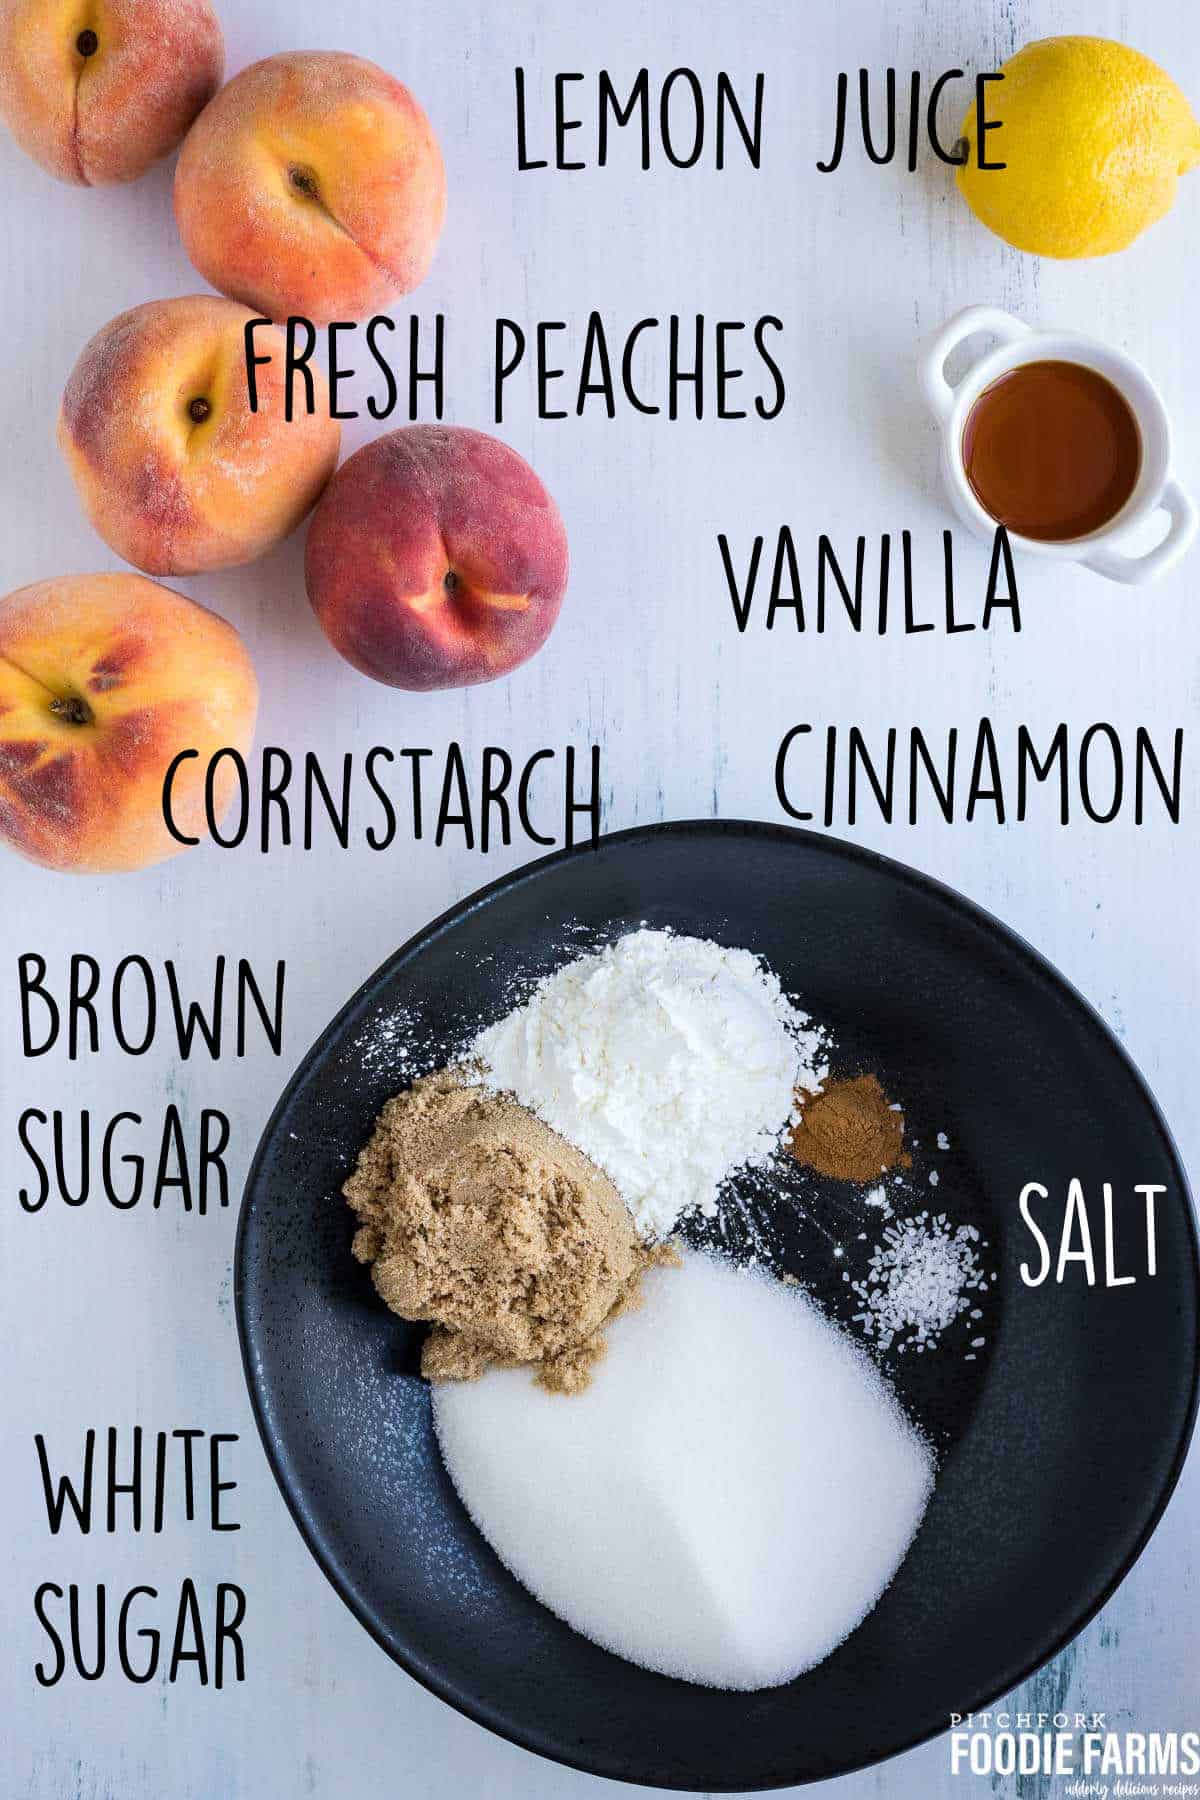 An images showing the ingredients needed to make fresh peach pie filling with text lables.